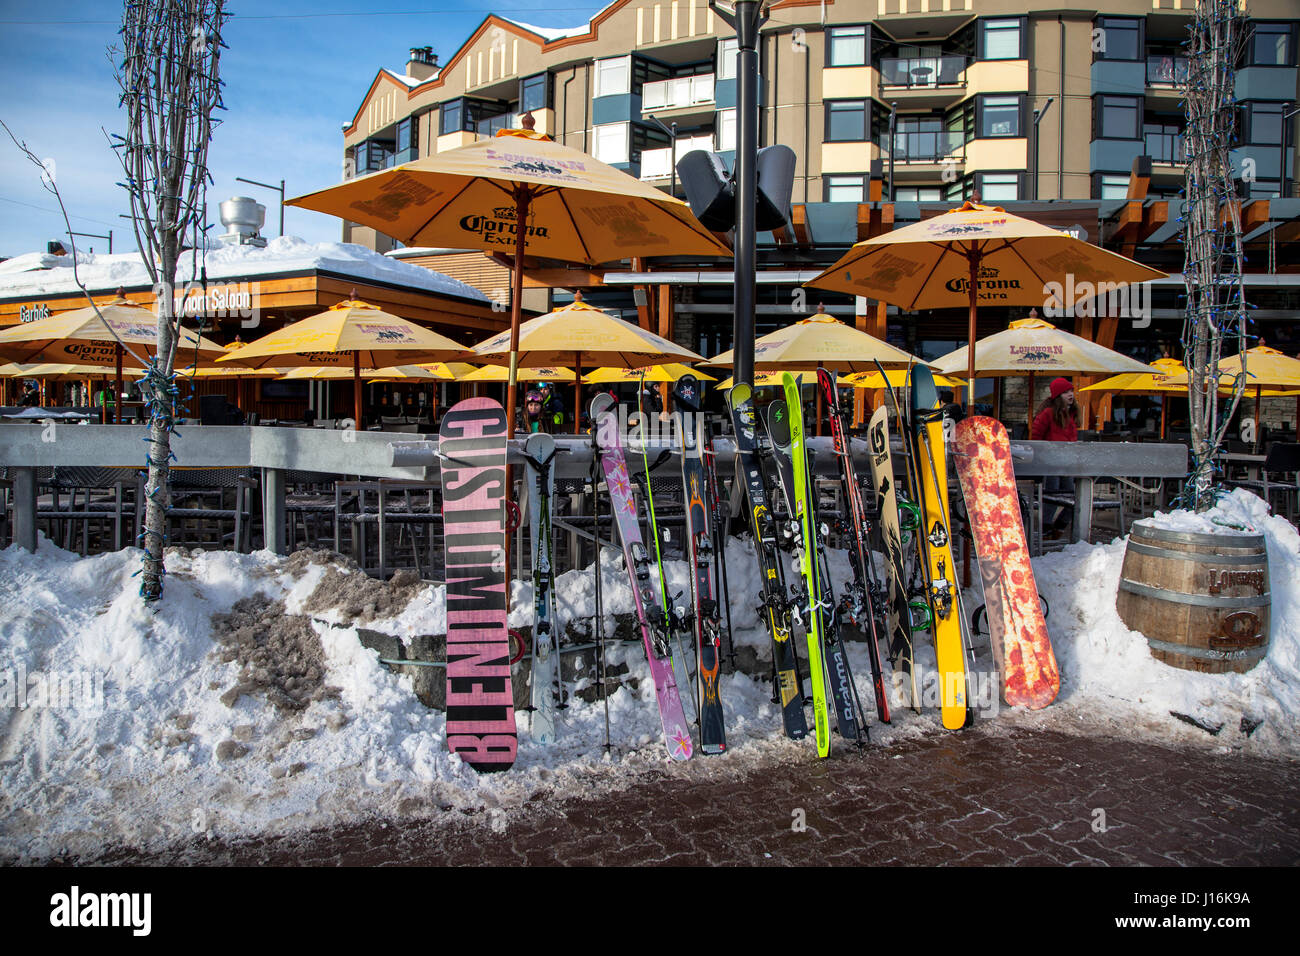 Skis, Snowboards, and Poles on a rack, Whistler, Canada Stock Photo